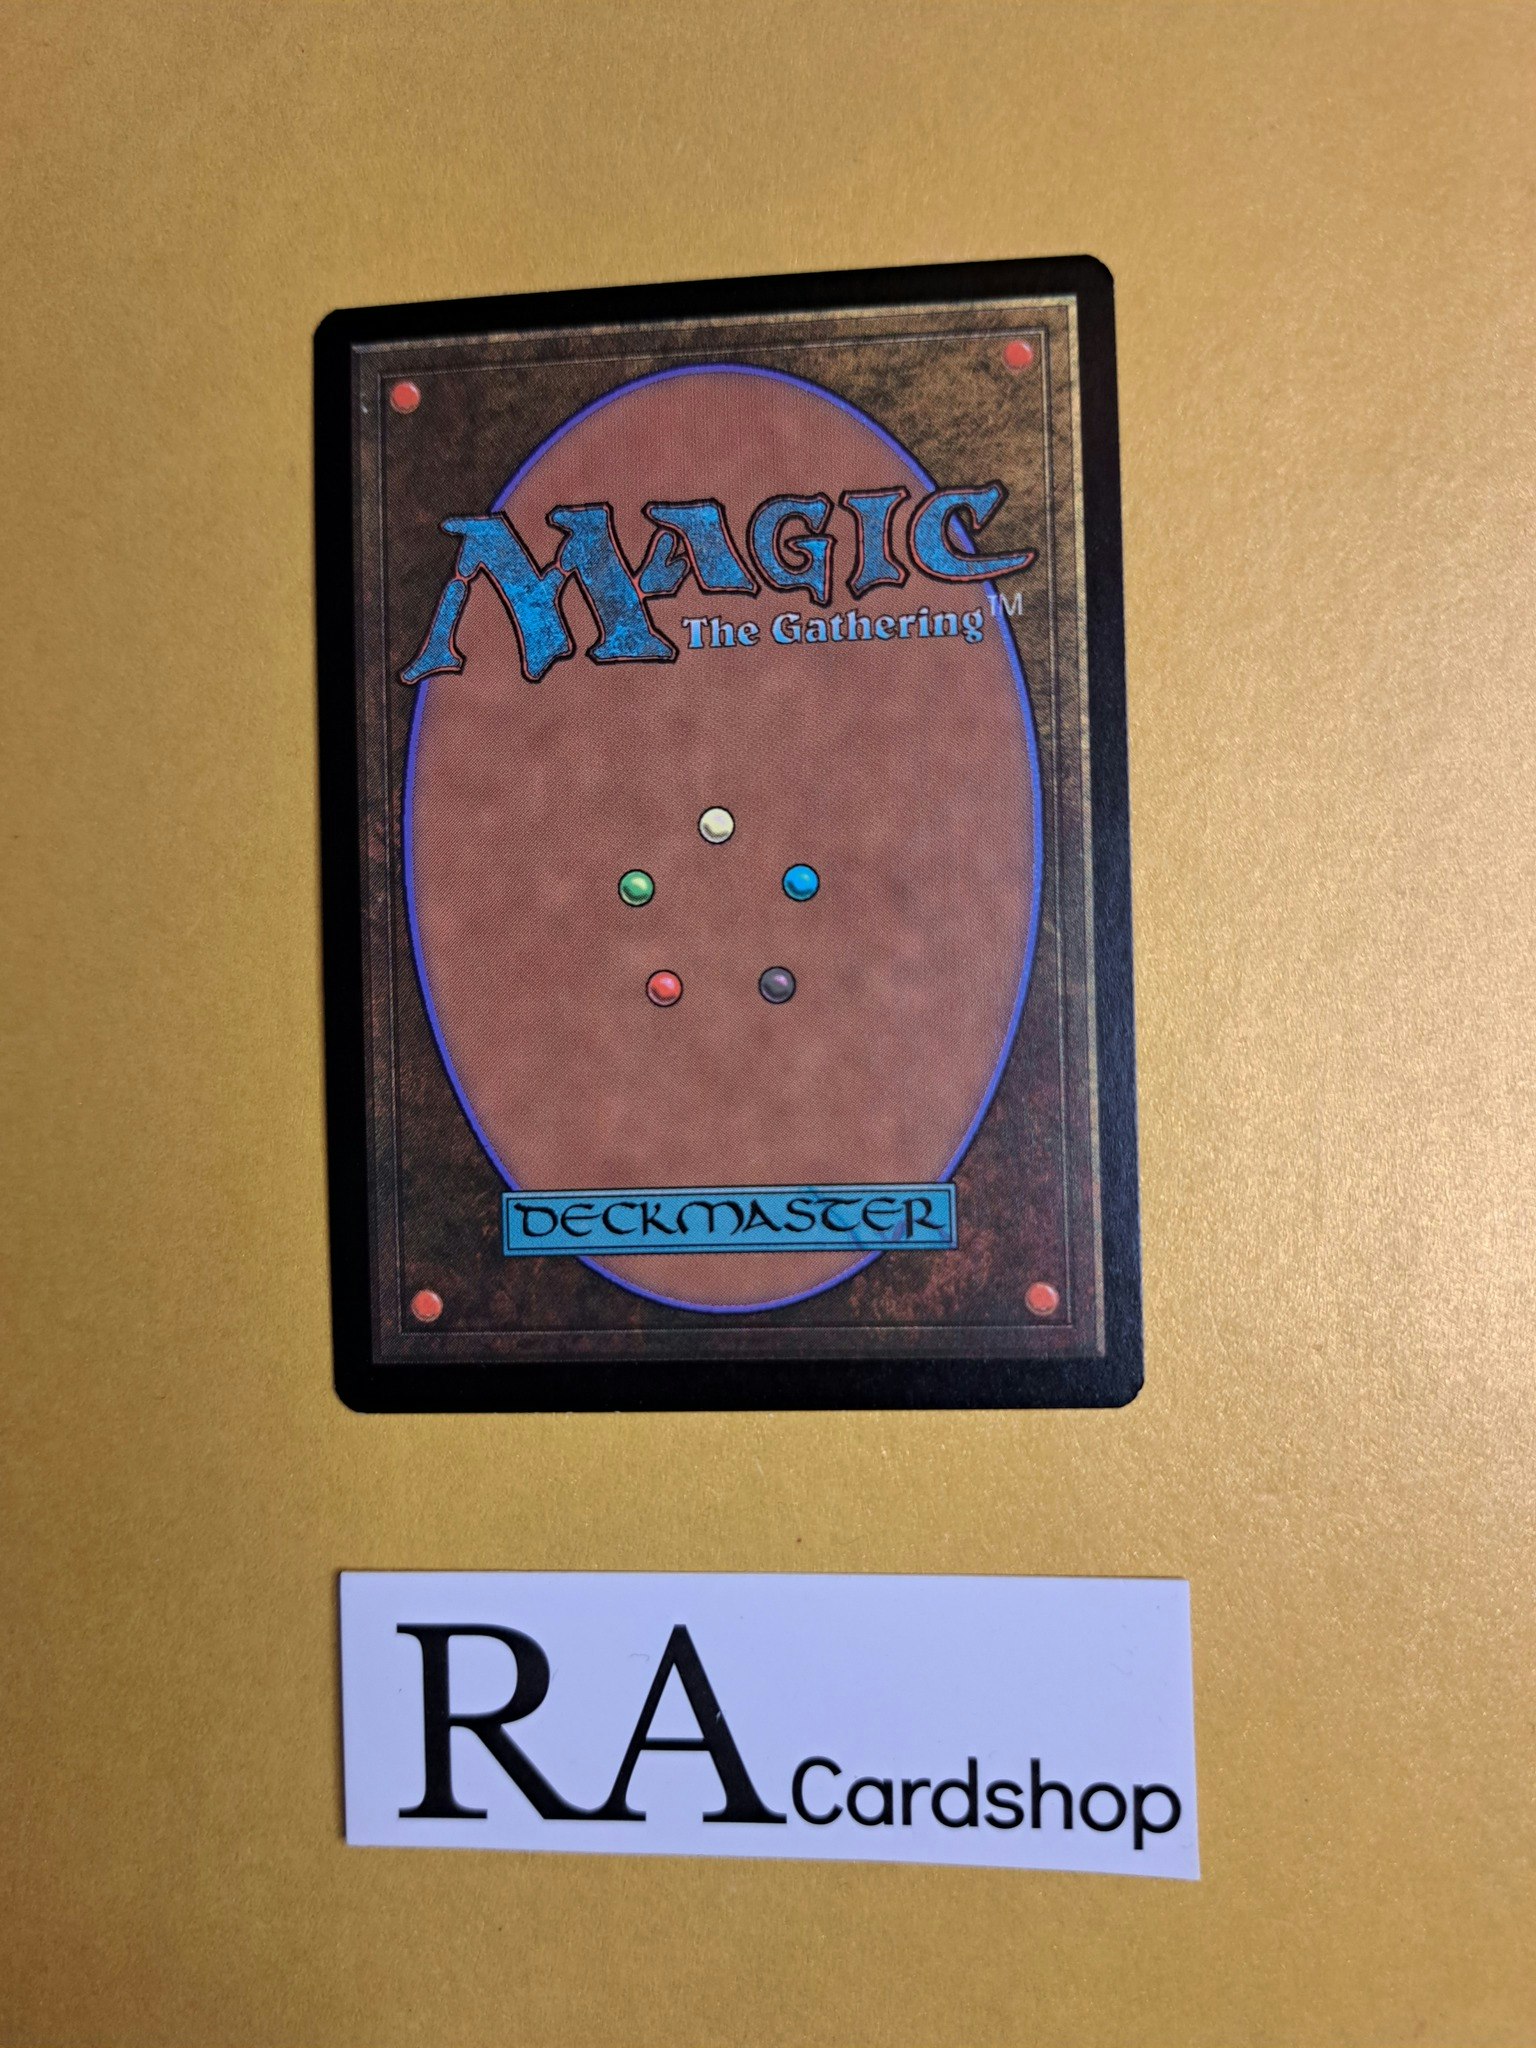 Clear the Stage Uncommon 068/259 Ravnica Allegiance (RNA) Magic the Gathering